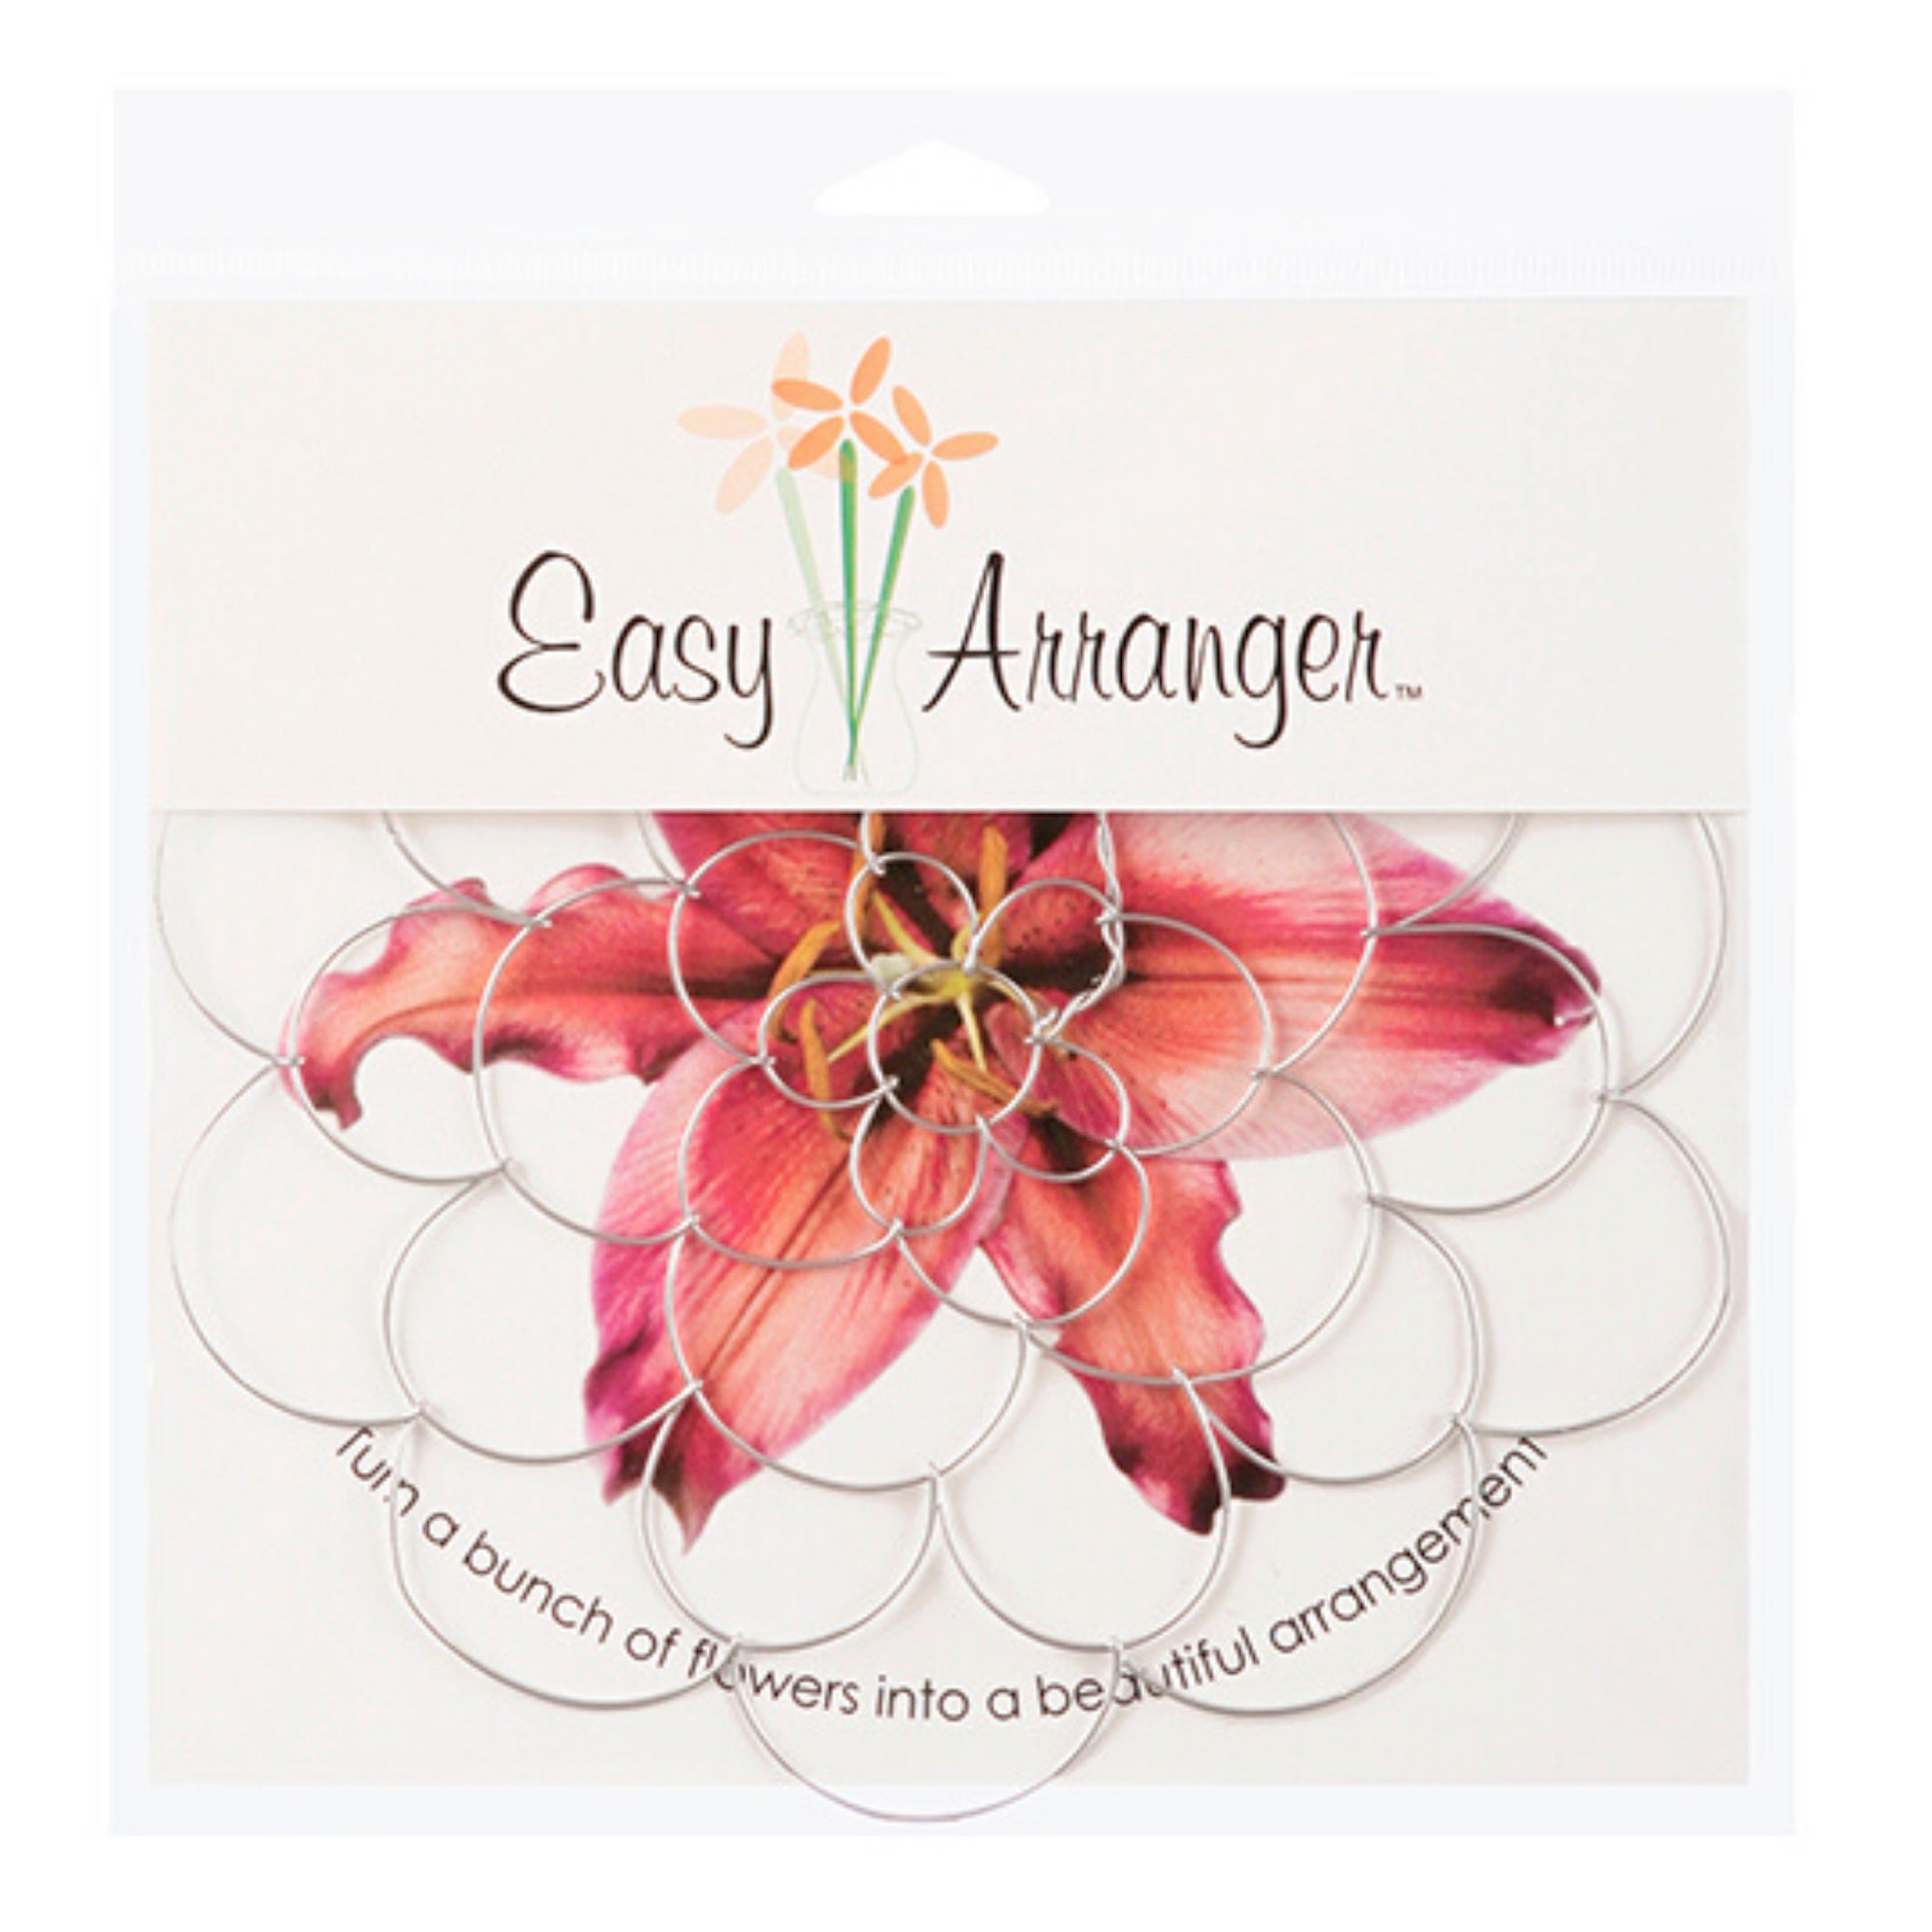 Packaging for the 8 inch Easy Arranger for making beautiful flower arrangements